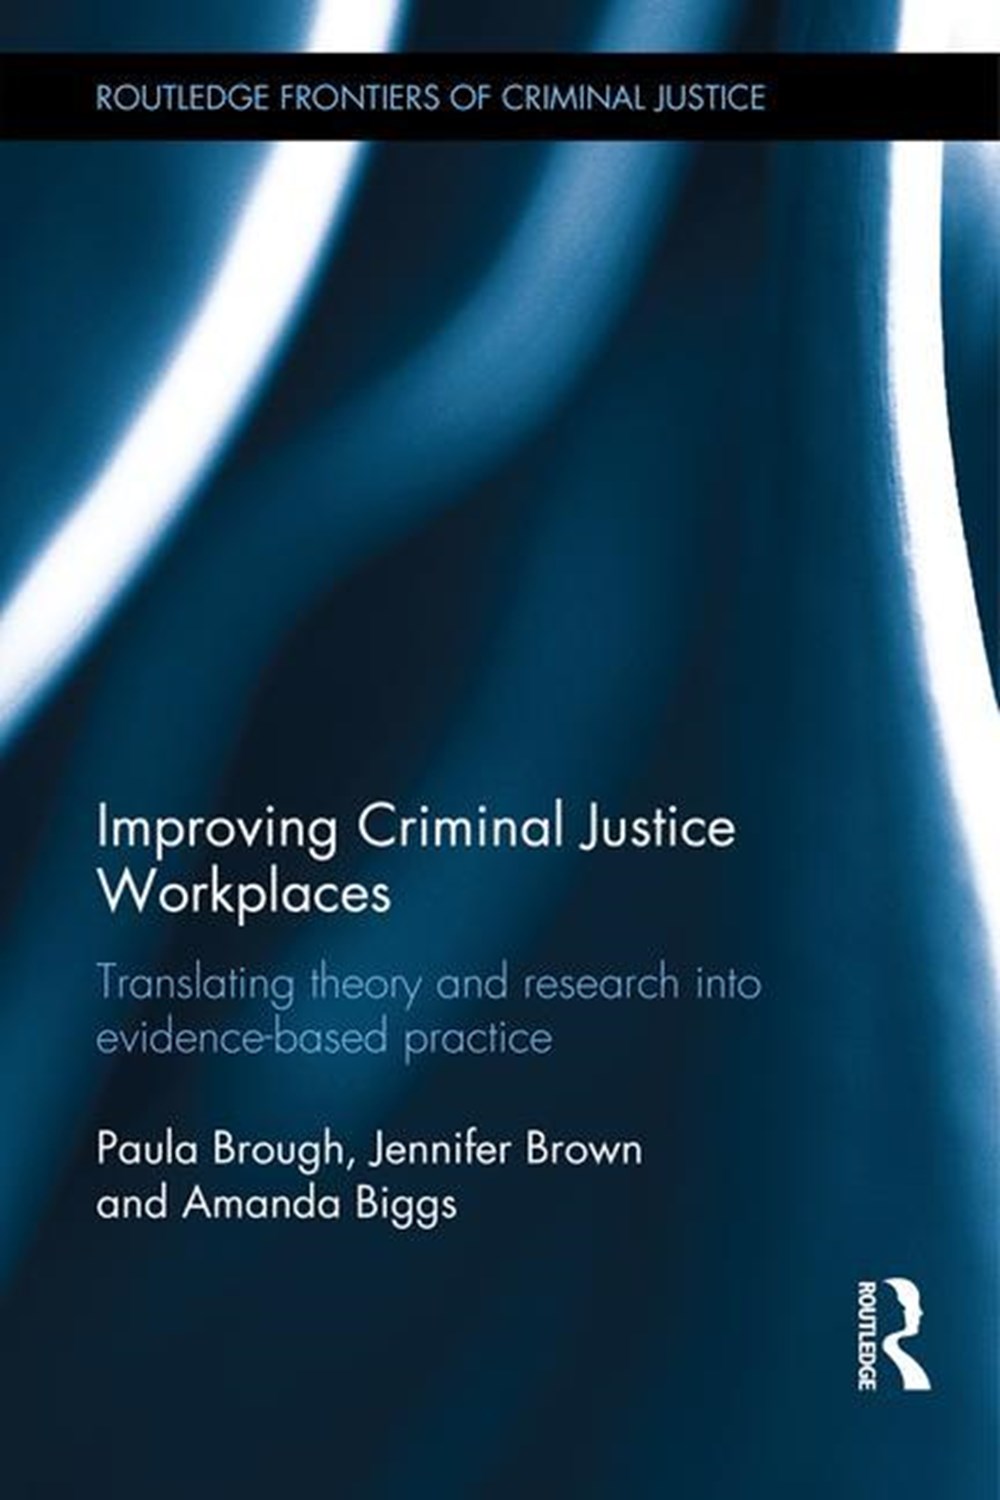 Improving Criminal Justice Workplaces: Translating theory and research into evidence-based practice